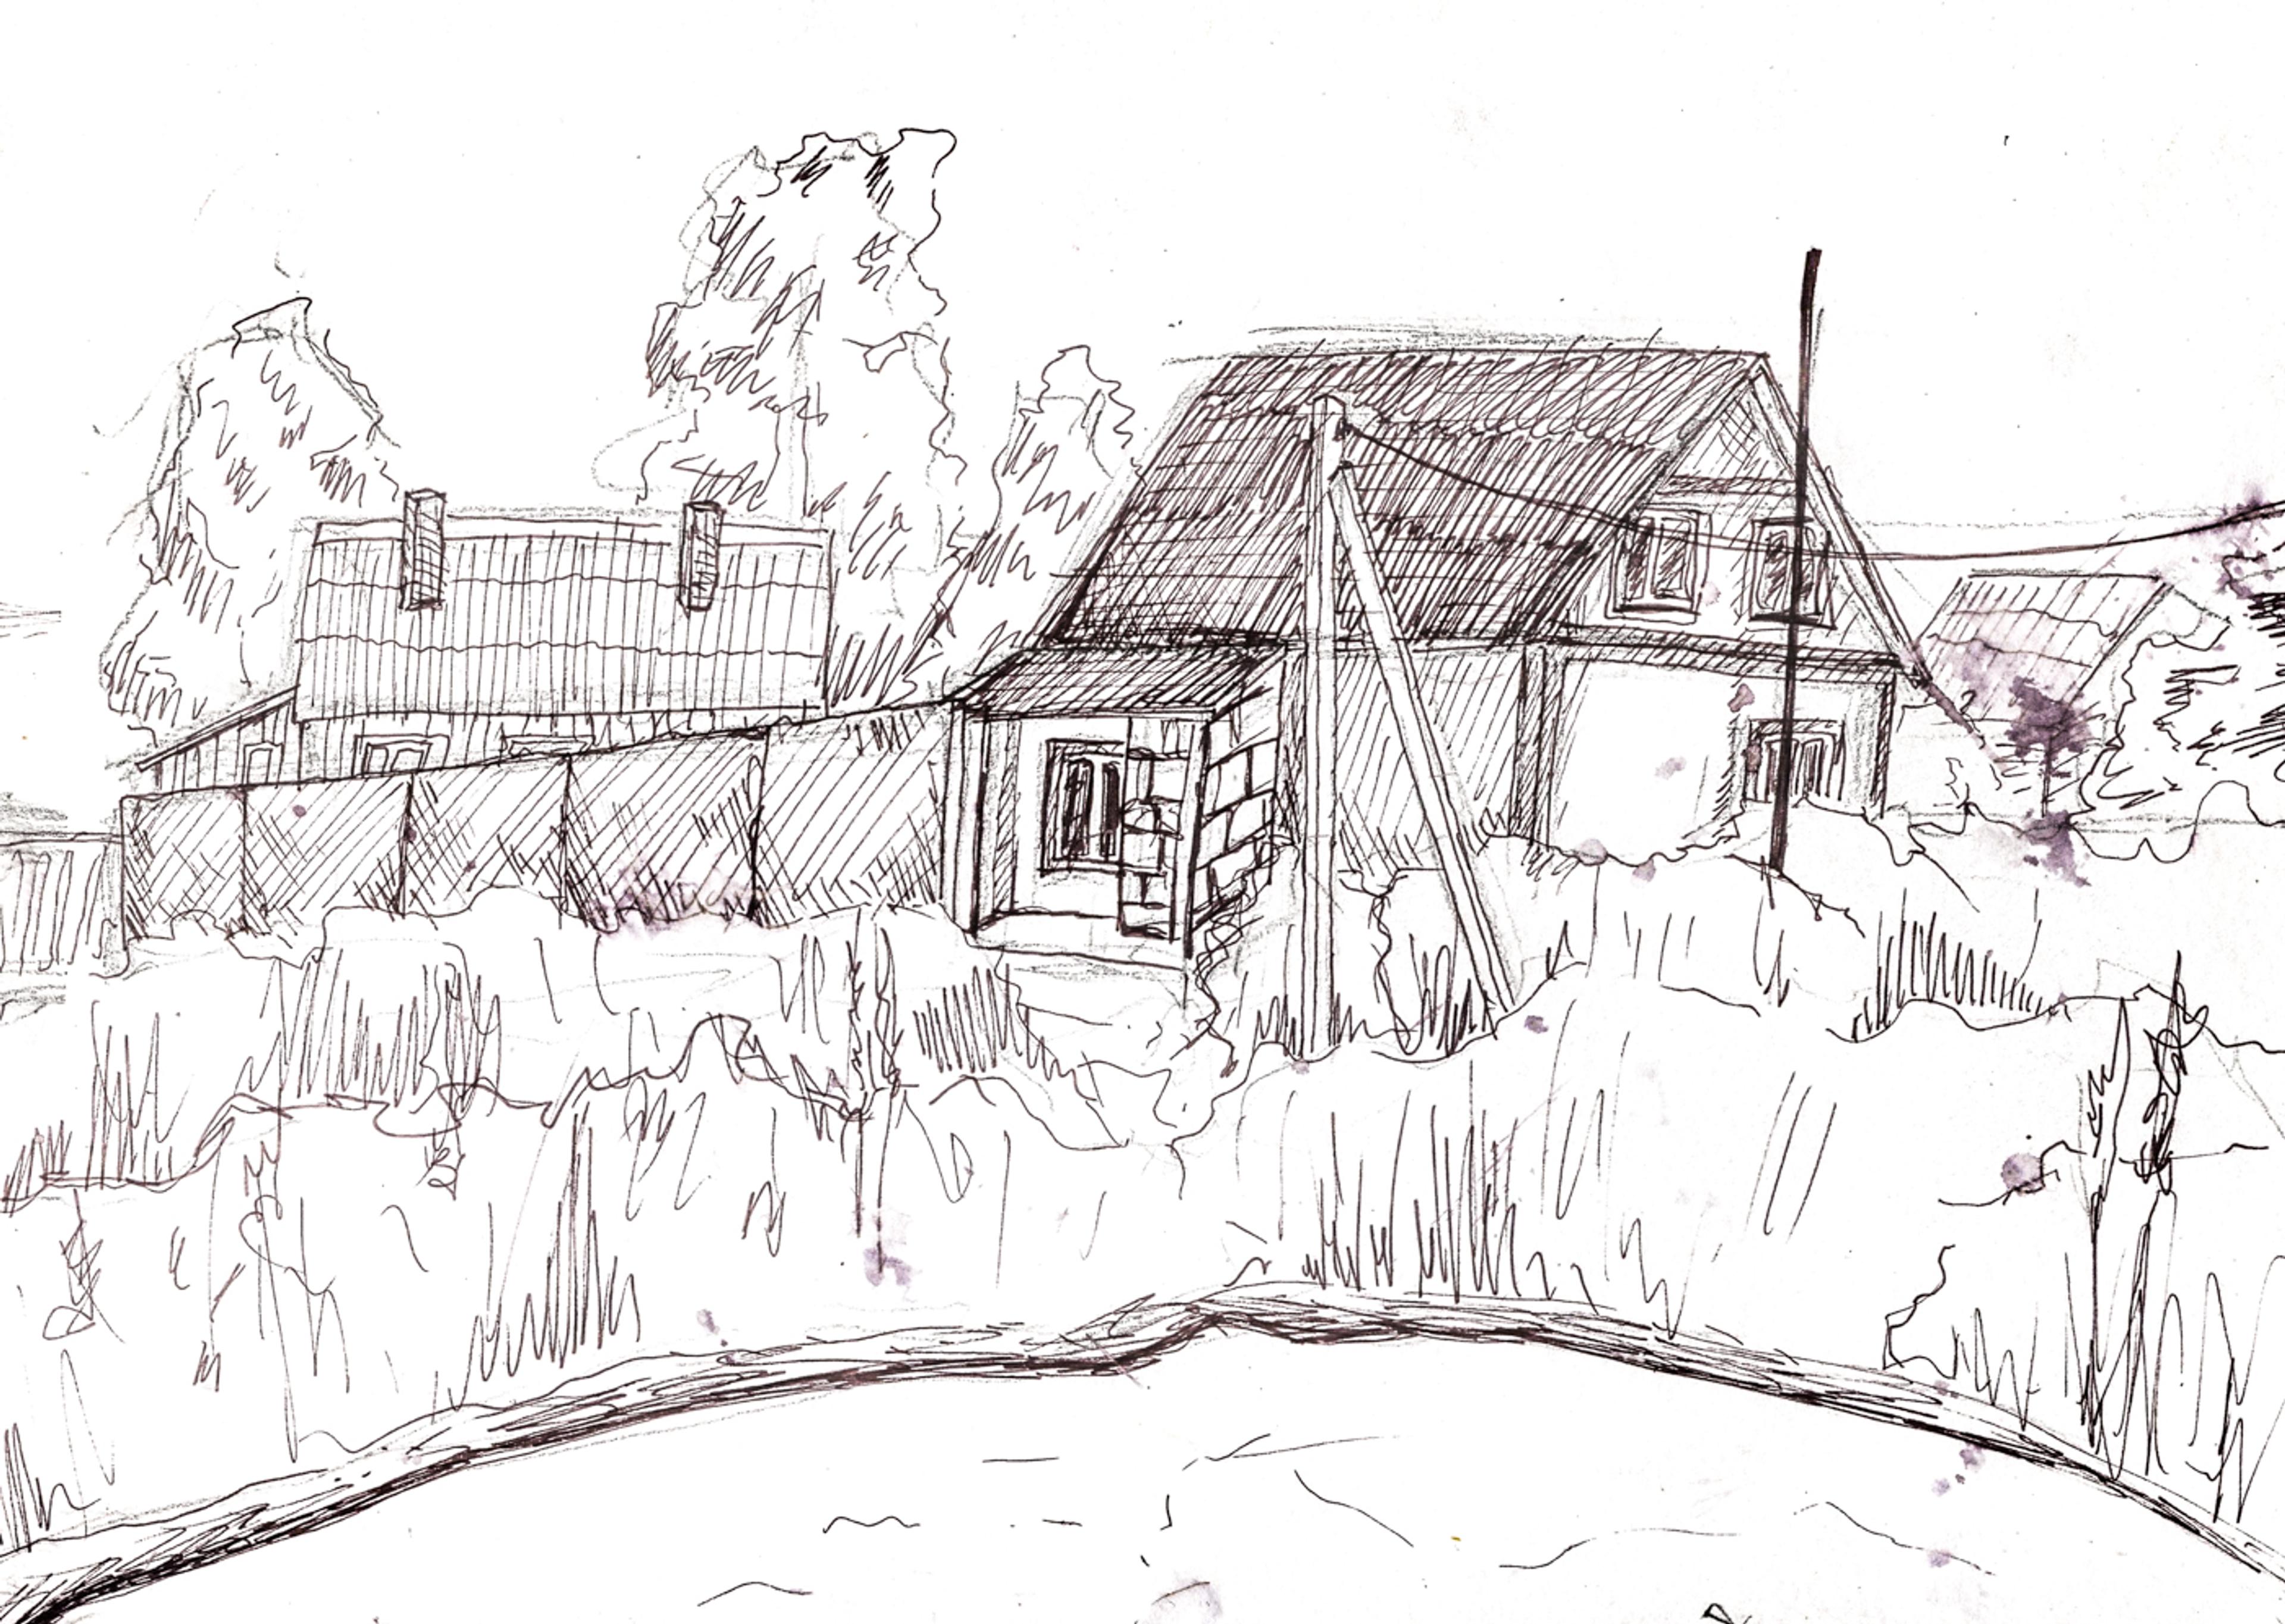 black and white pen drawing of the house and scenery near the pond. 